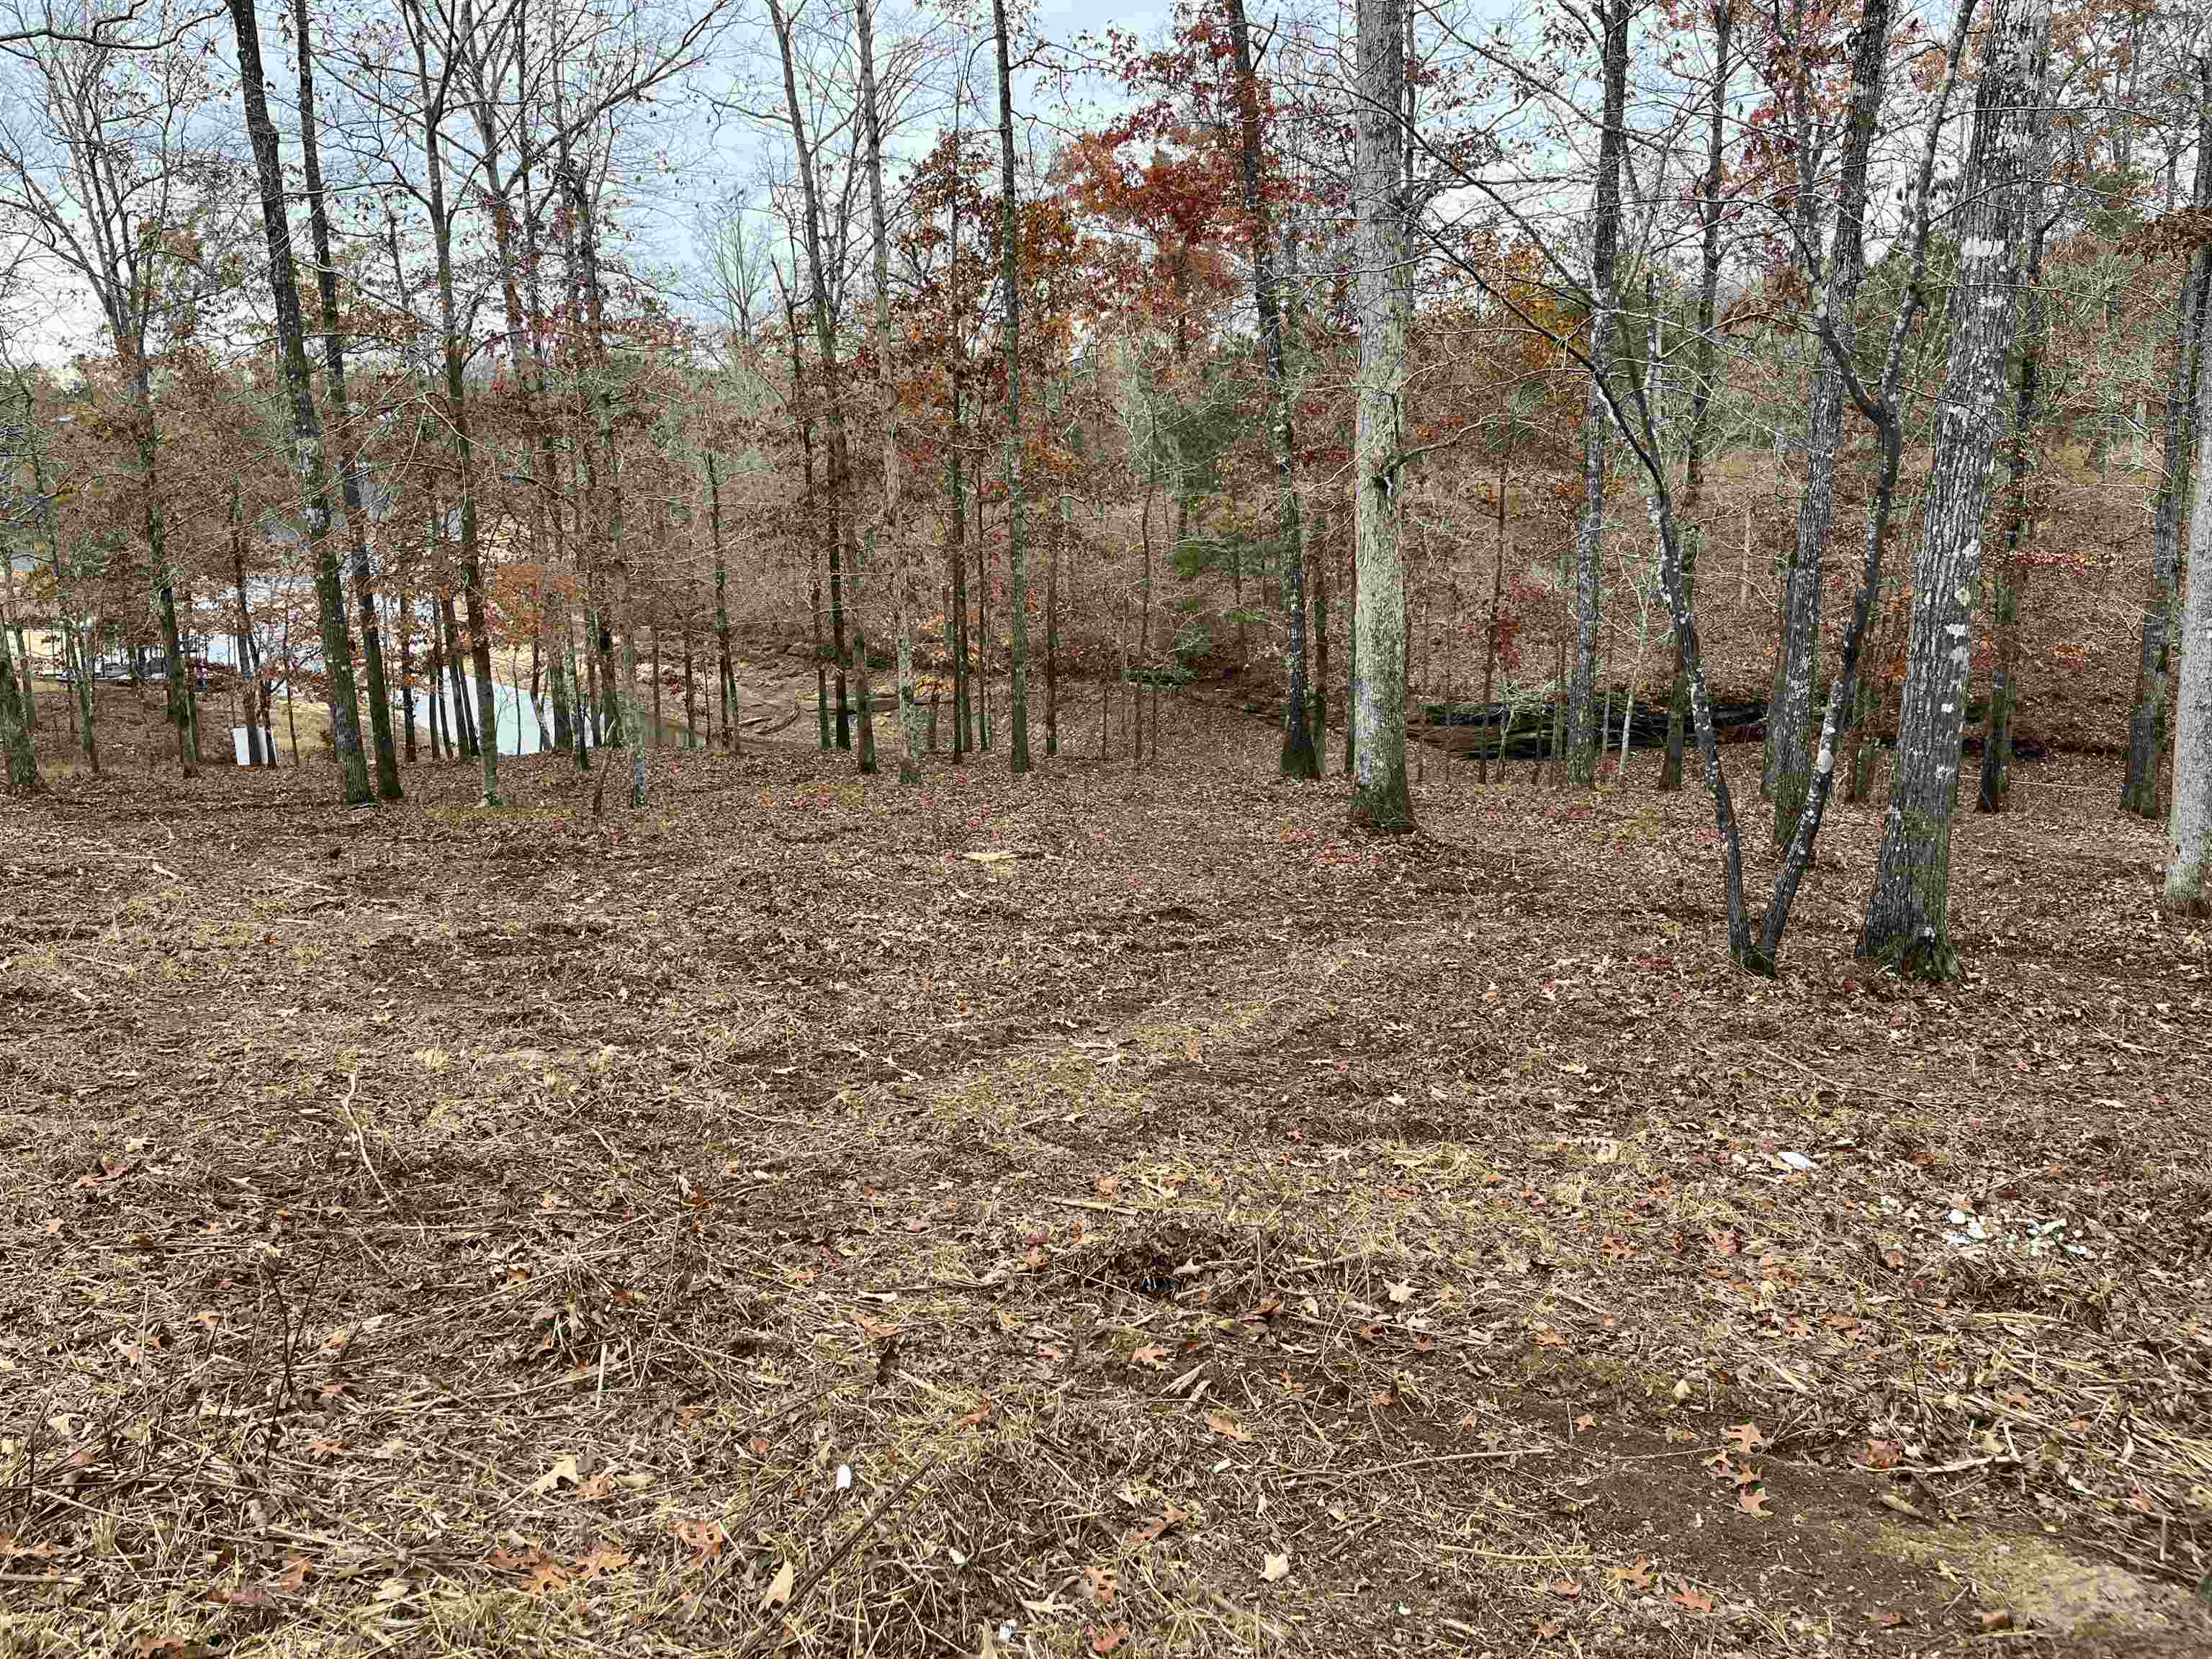 Lot 22/22A Edgewater Bend Rd, Double Springs, AL 35553